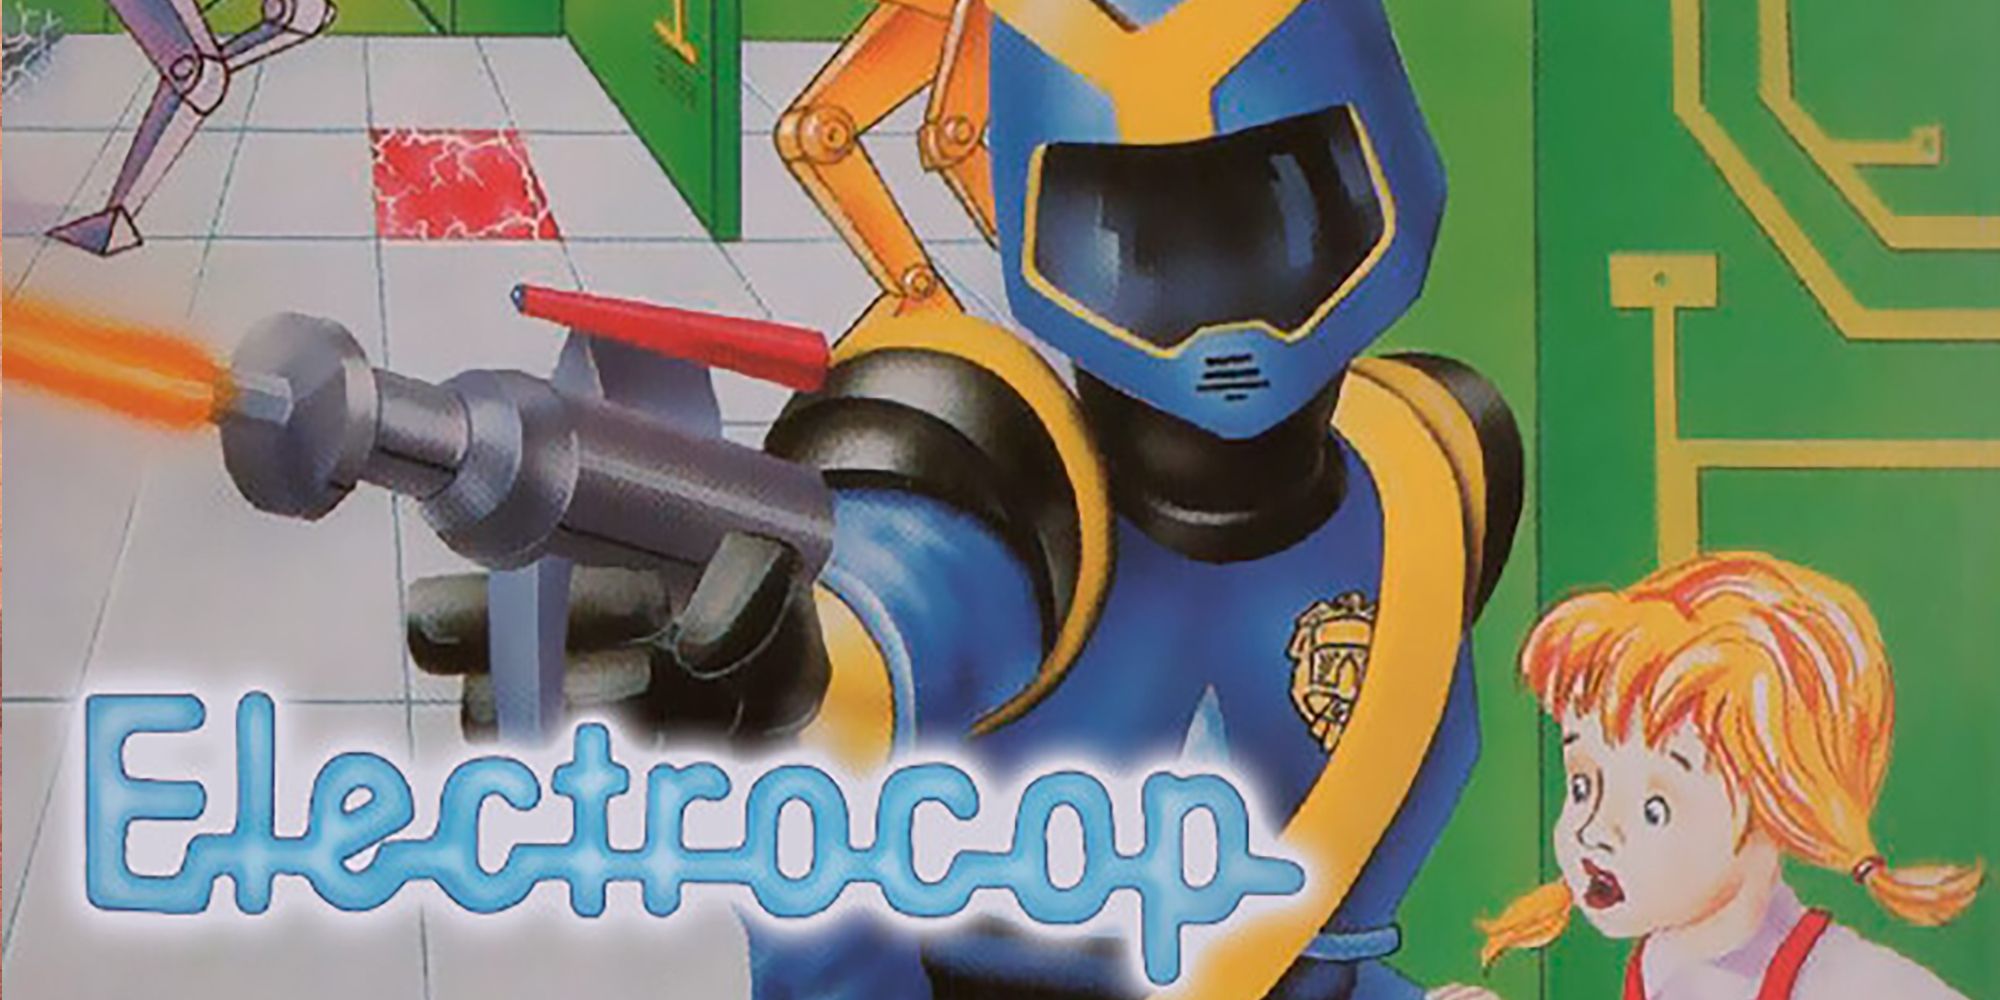 A Poster For Electrocop